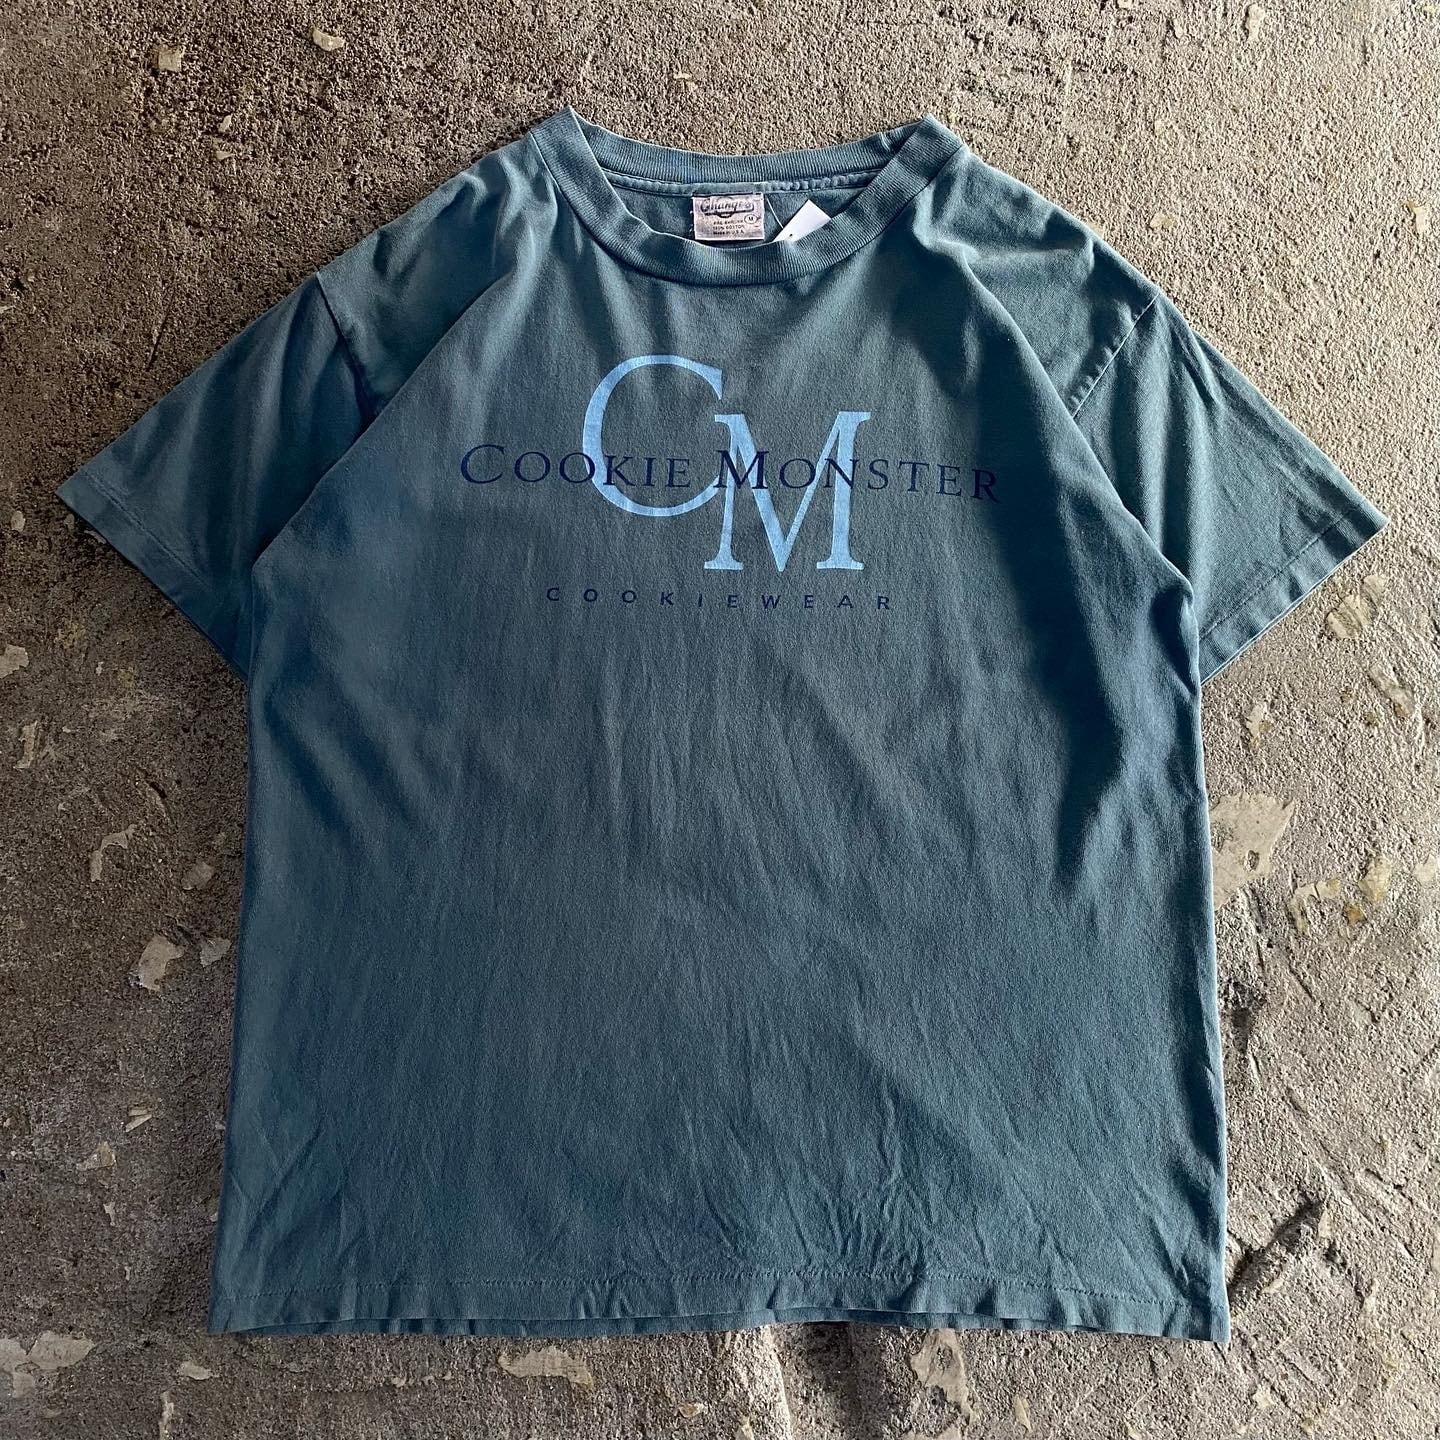 80s 90s old Calvin Klein ヴィンテージ　Tシャツ　ロンT